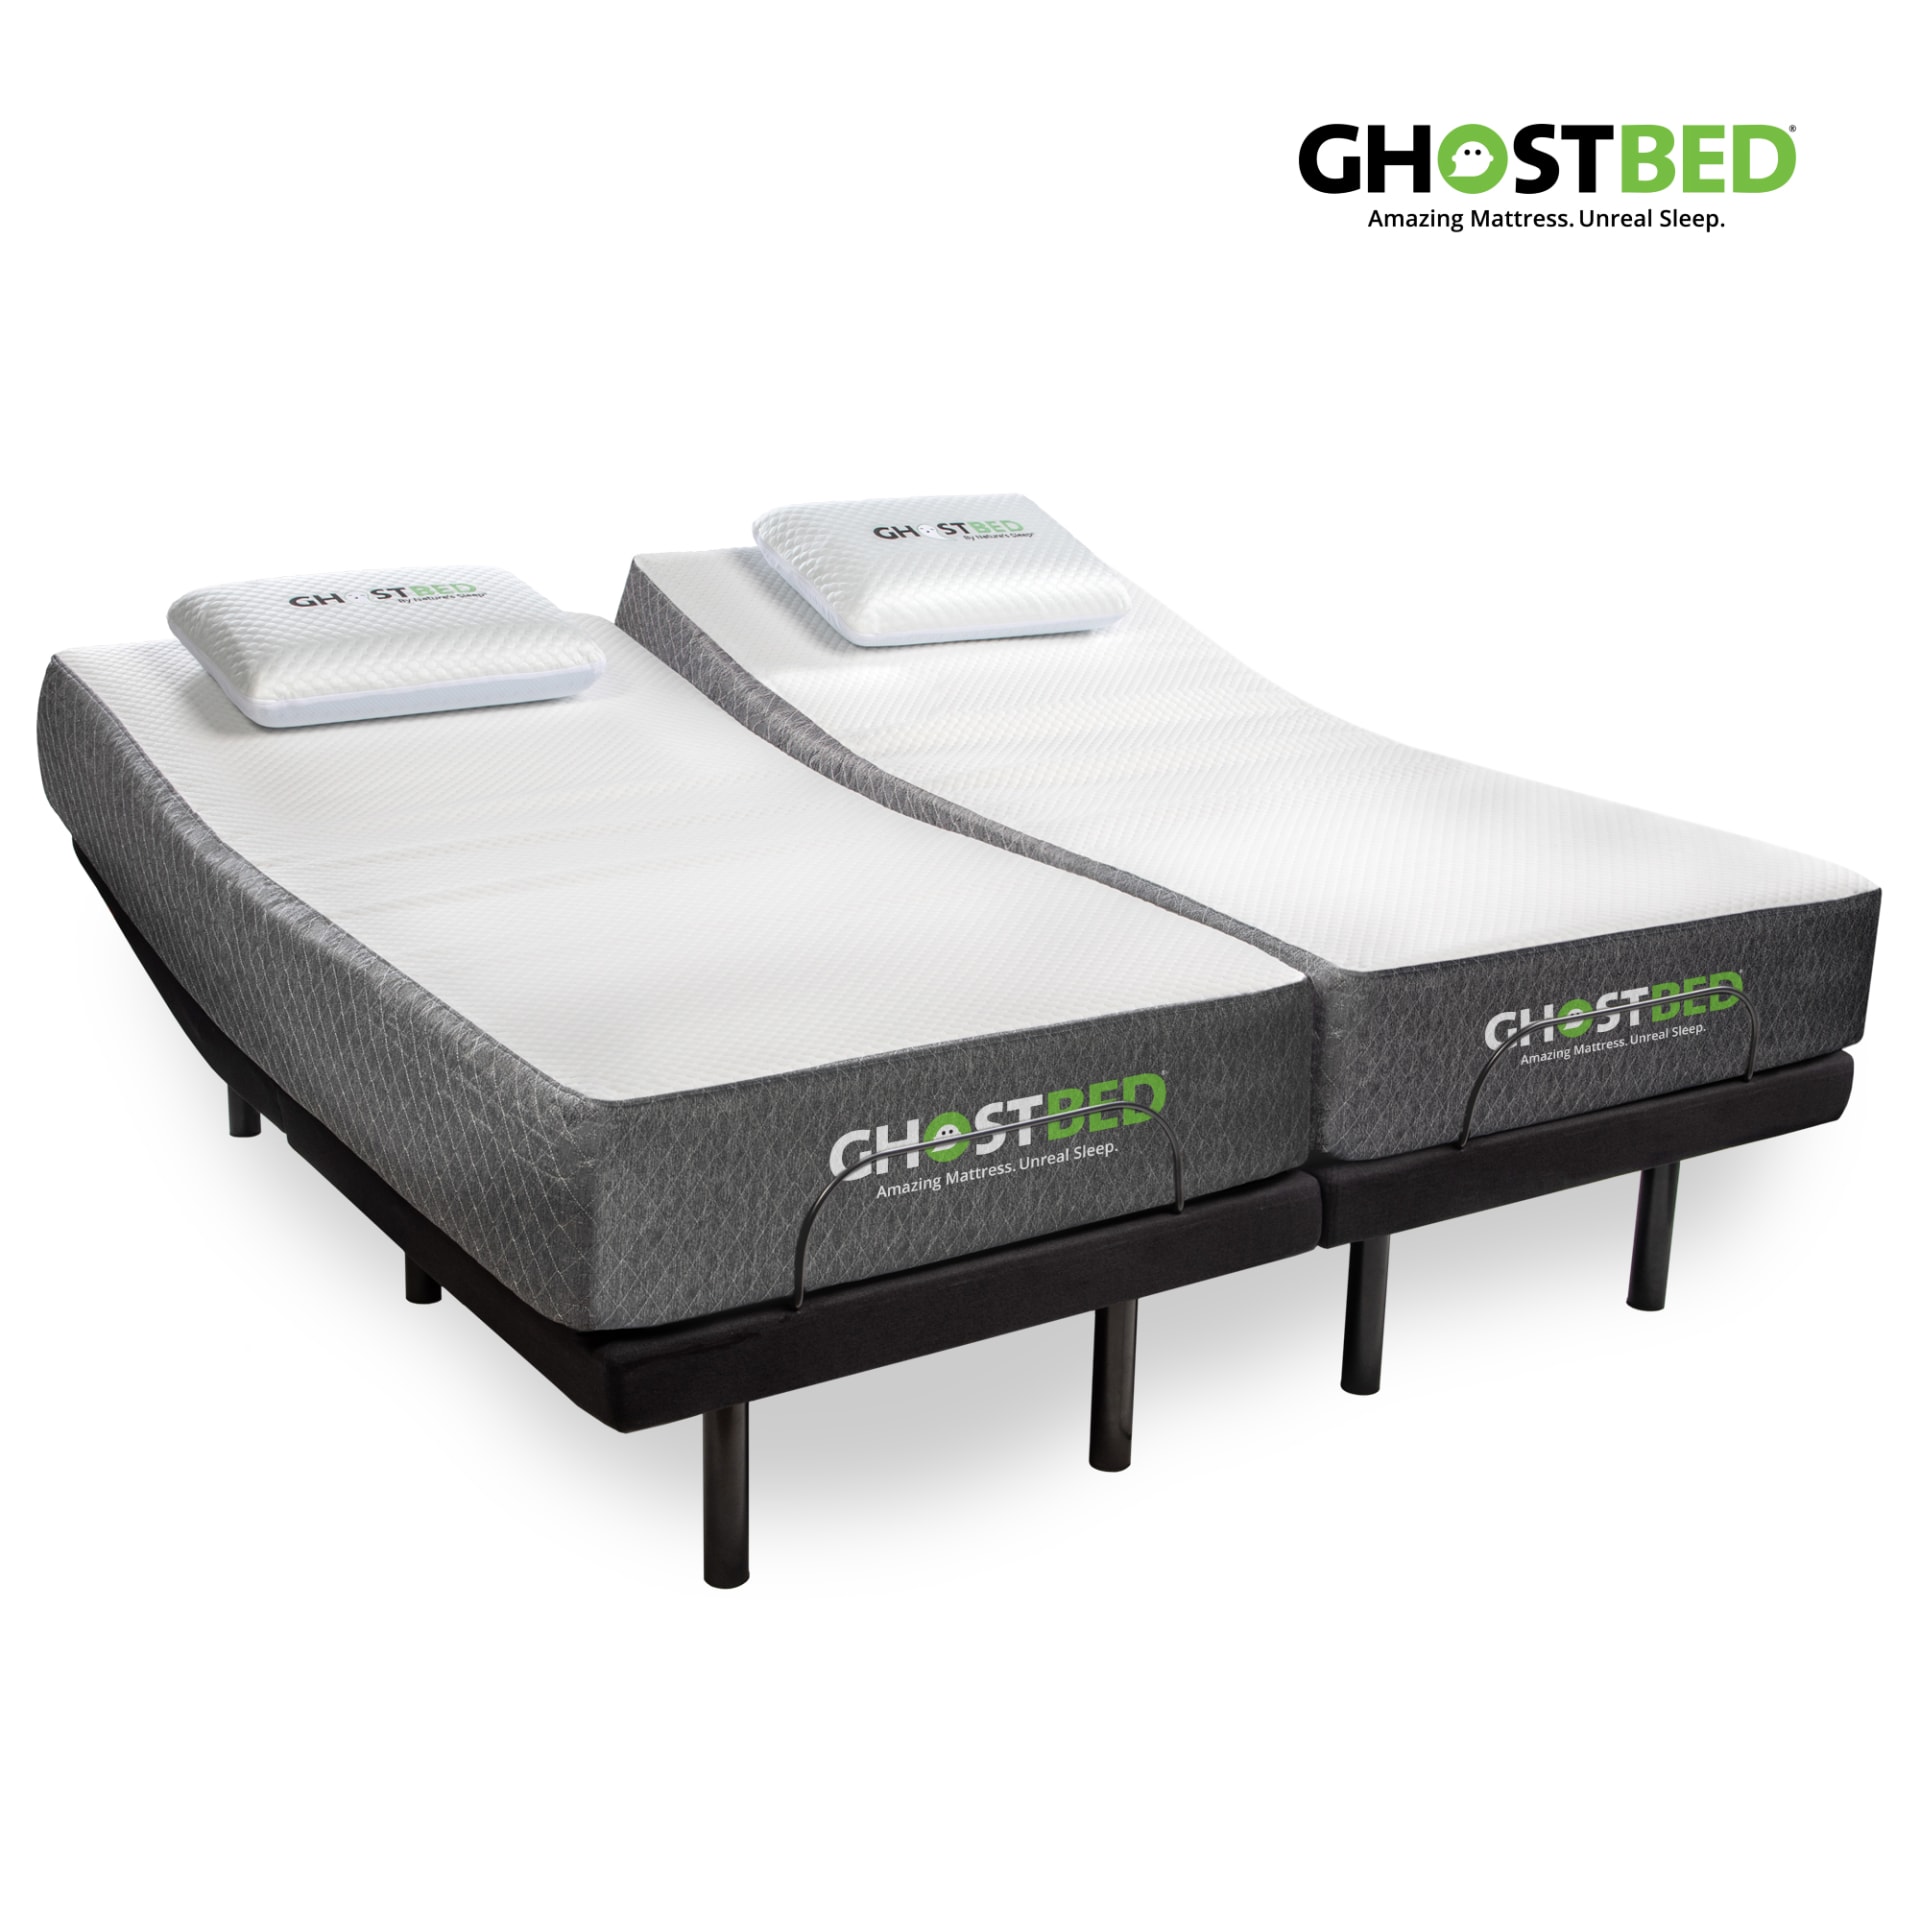 Ghostbed 11 Memory Foam Mattress With, How To Dress A Split King Adjustable Bed